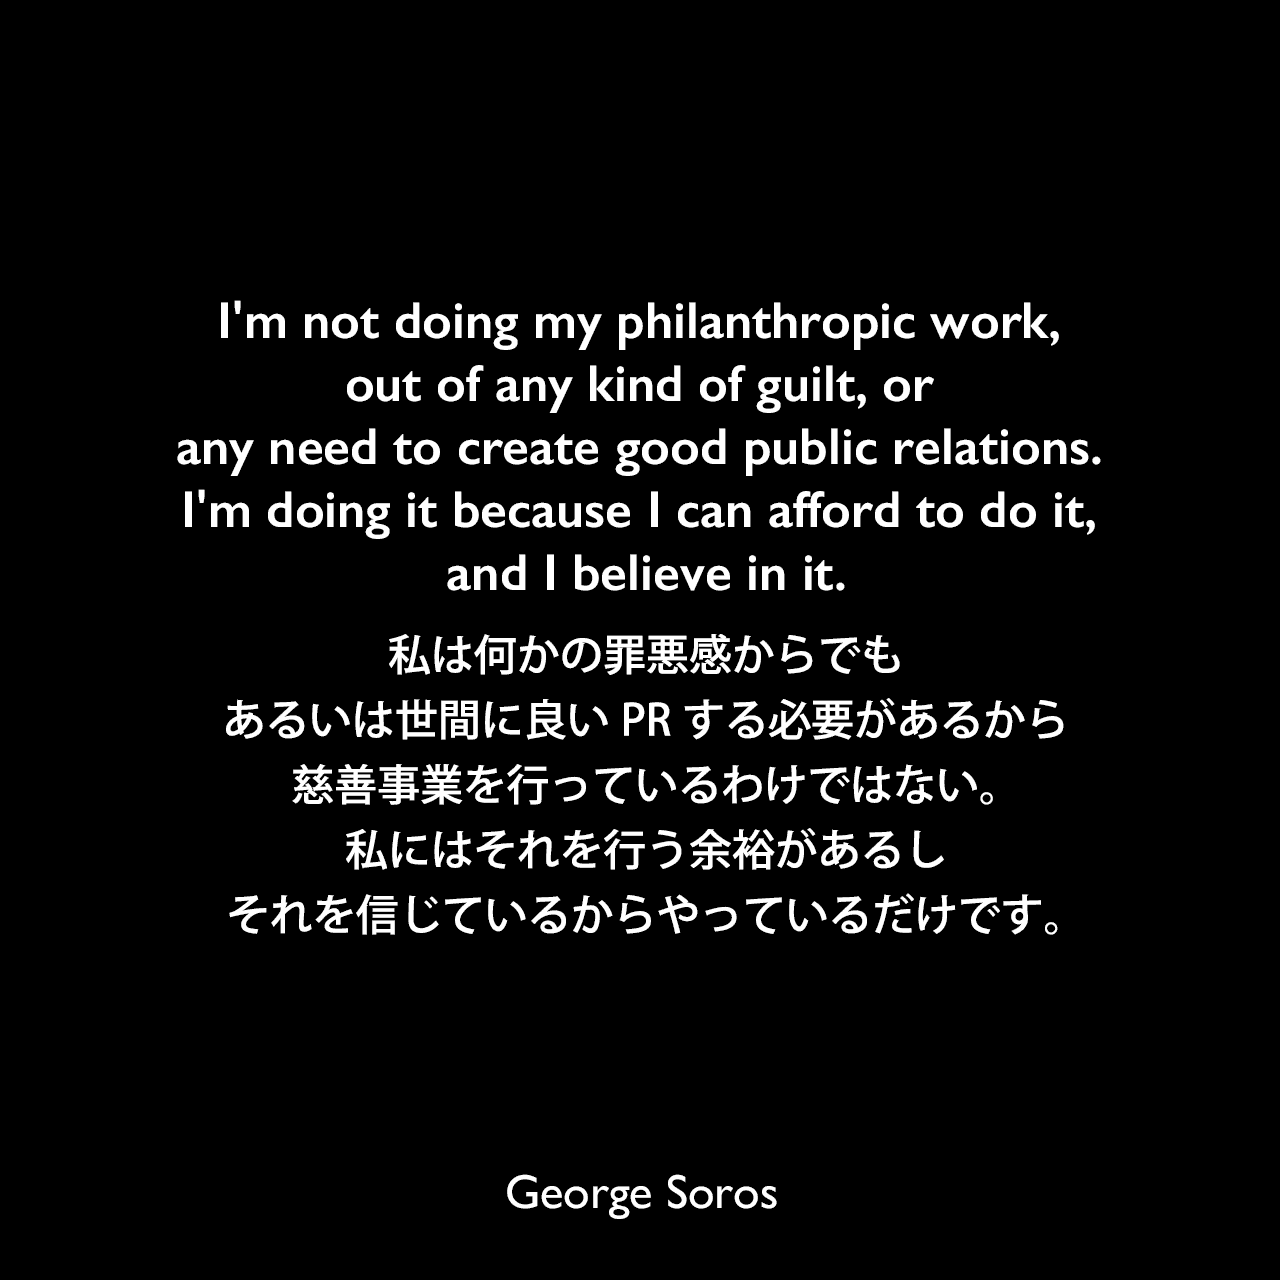 I'm not doing my philanthropic work, out of any kind of guilt, or any need to create good public relations. I'm doing it because I can afford to do it, and I believe in it.私は何かの罪悪感からでも、あるいは世間に良いPRする必要があるから、慈善事業を行っているわけではない。私にはそれを行う余裕があるし、それを信じているからやっているだけです。George Soros